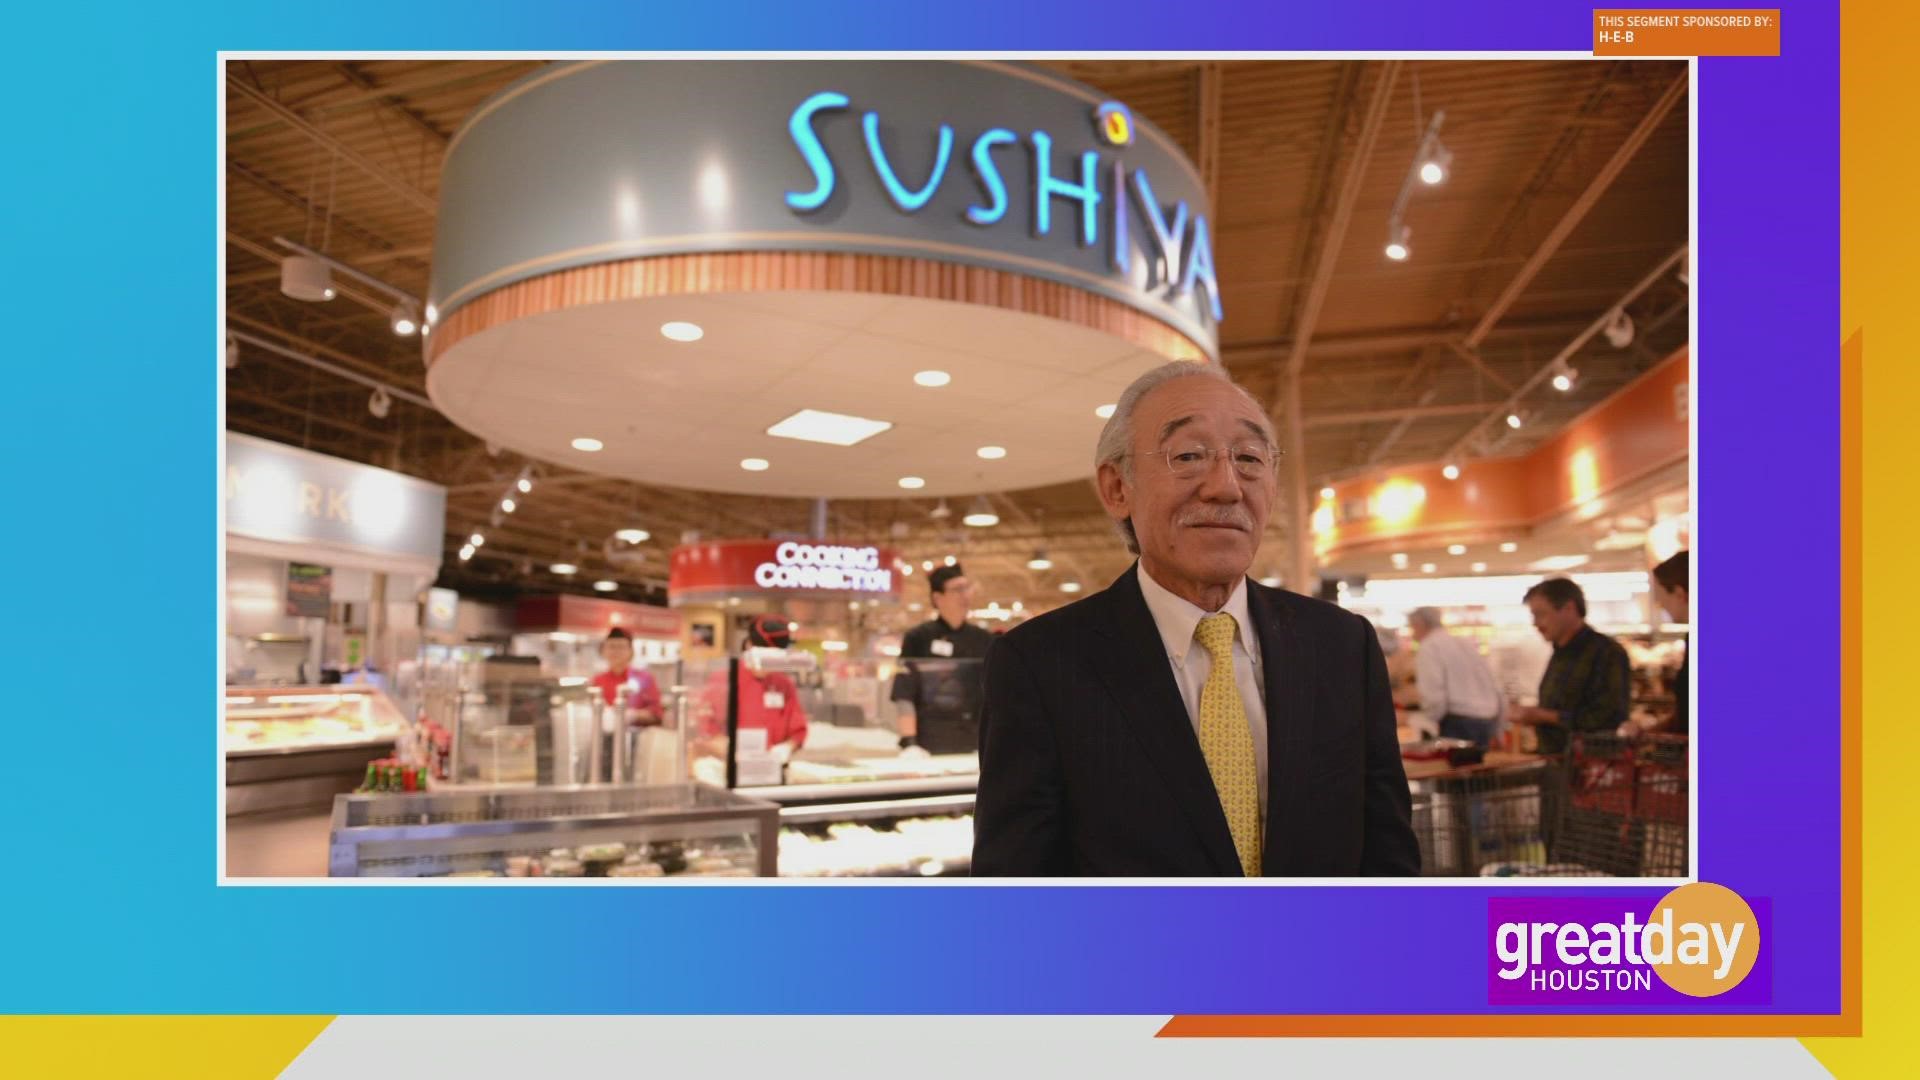 Great Day Houston meets the man who started the sushi bar, Sushiya at H-E-B and how H-E-B is "Being The Change"